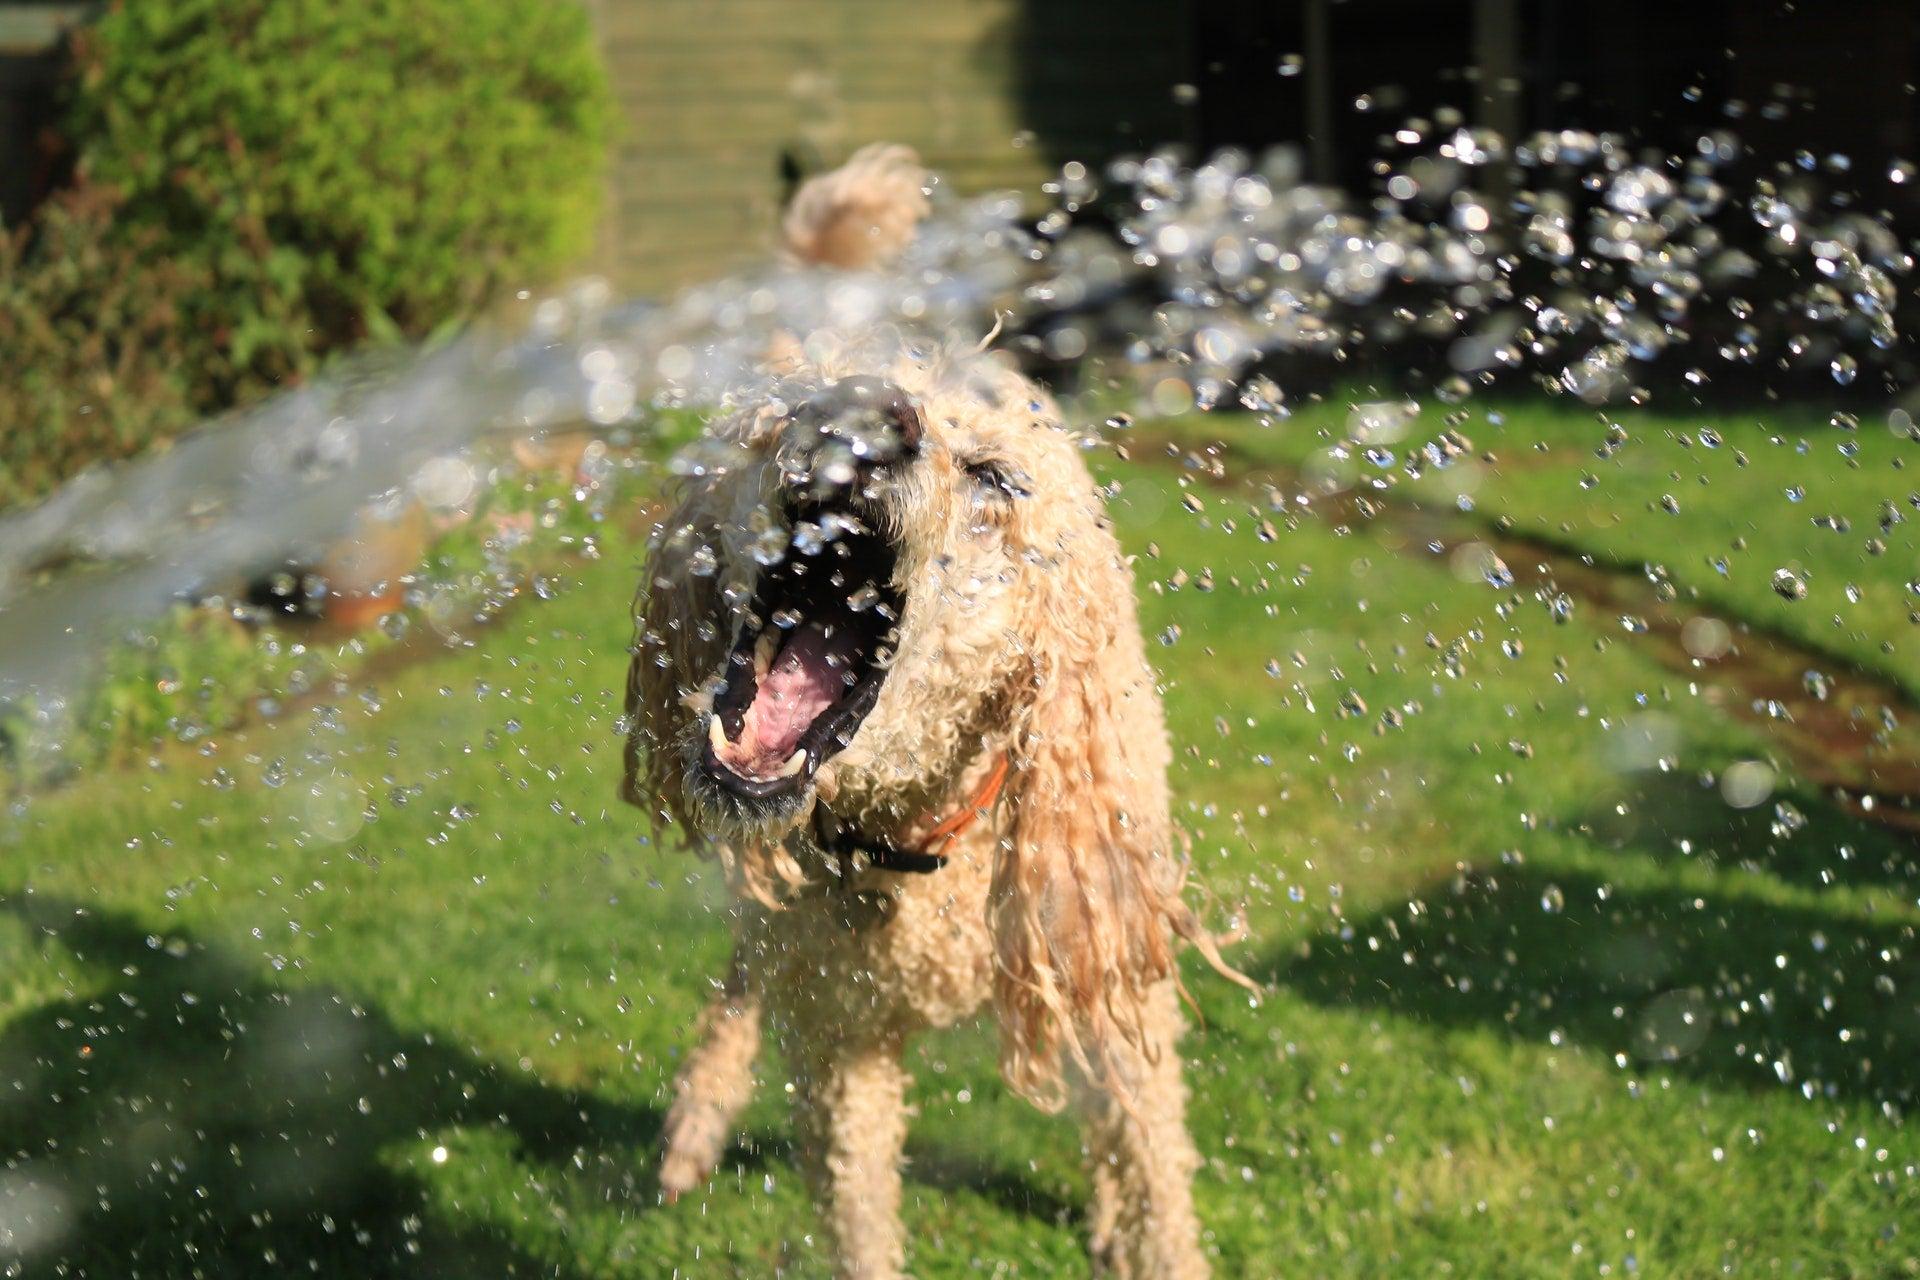 Save Your Dog From Heatstroke With These 9 Handy Tips!